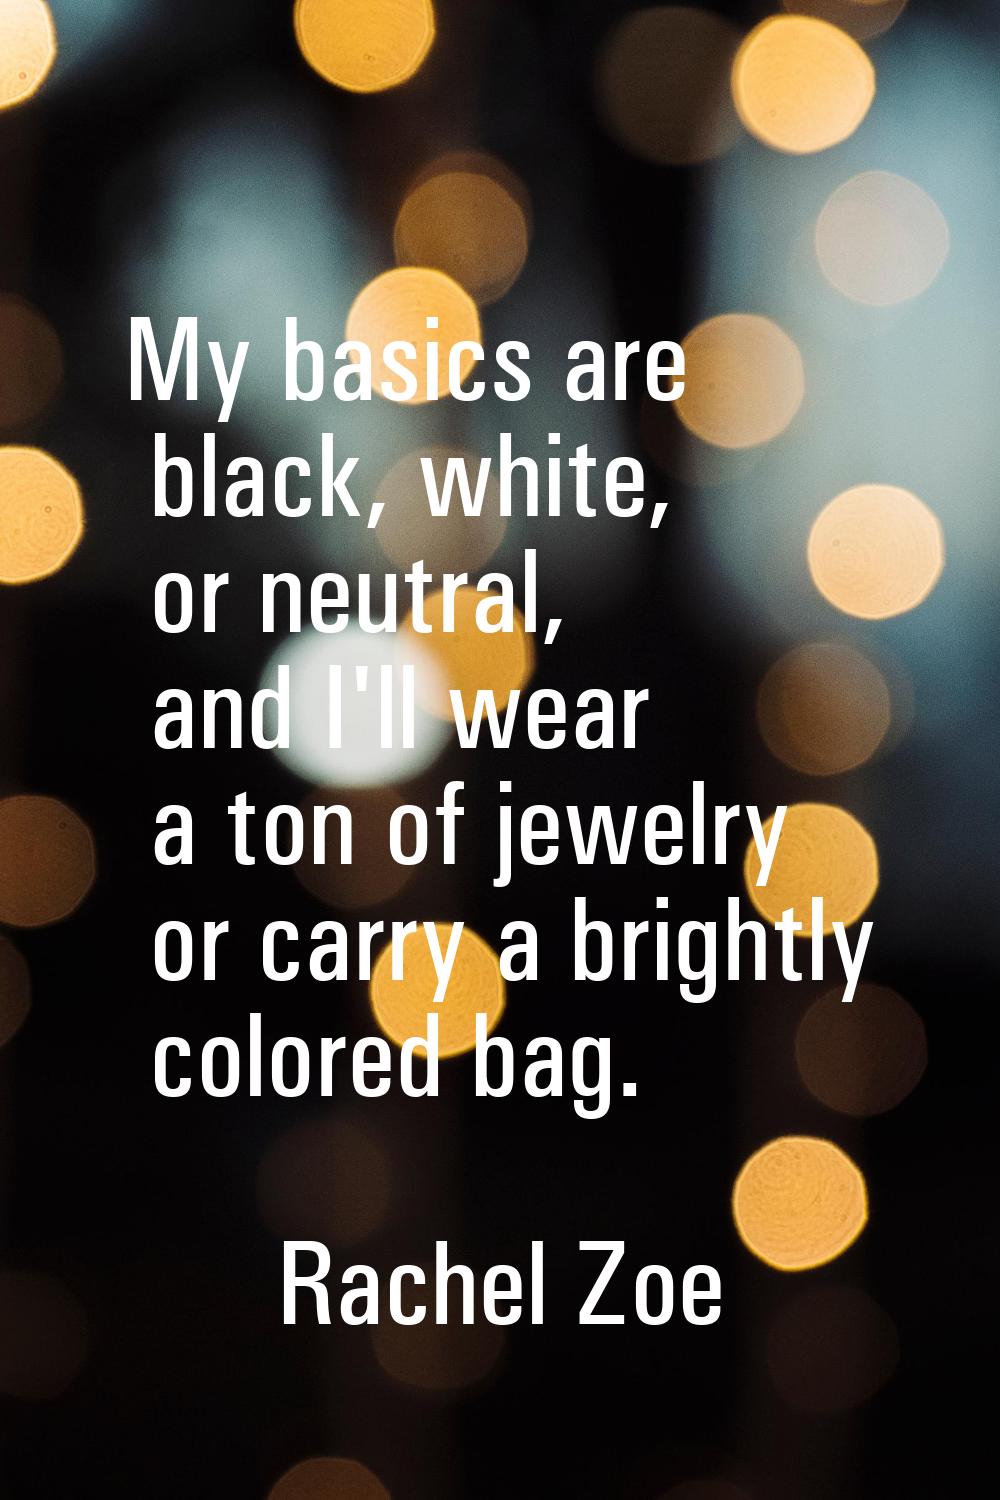 My basics are black, white, or neutral, and I'll wear a ton of jewelry or carry a brightly colored 